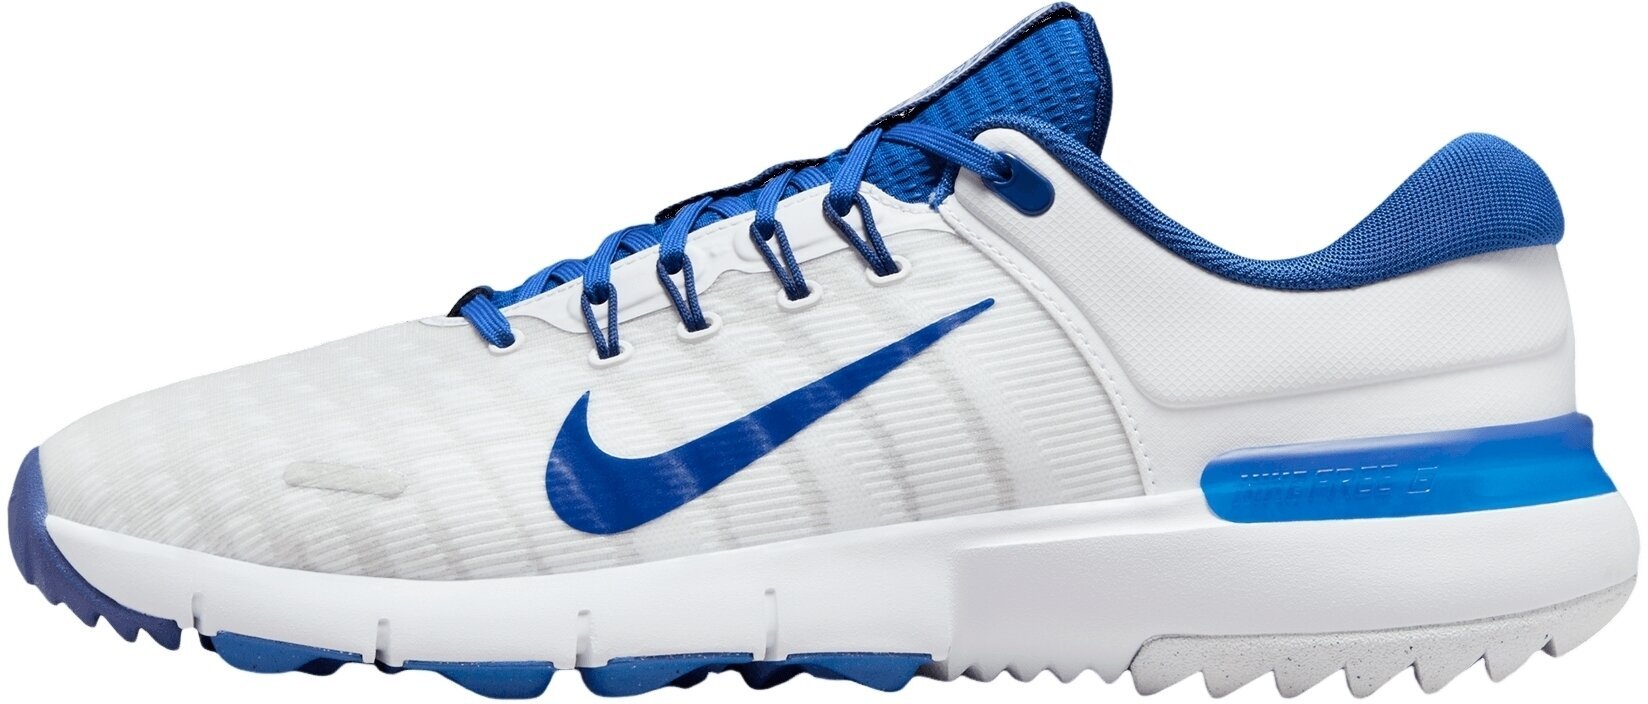 Chaussures de golf pour hommes Nike Free Golf Unisex Shoes Game Royal/Deep Royal Blue/Football Grey 42,5